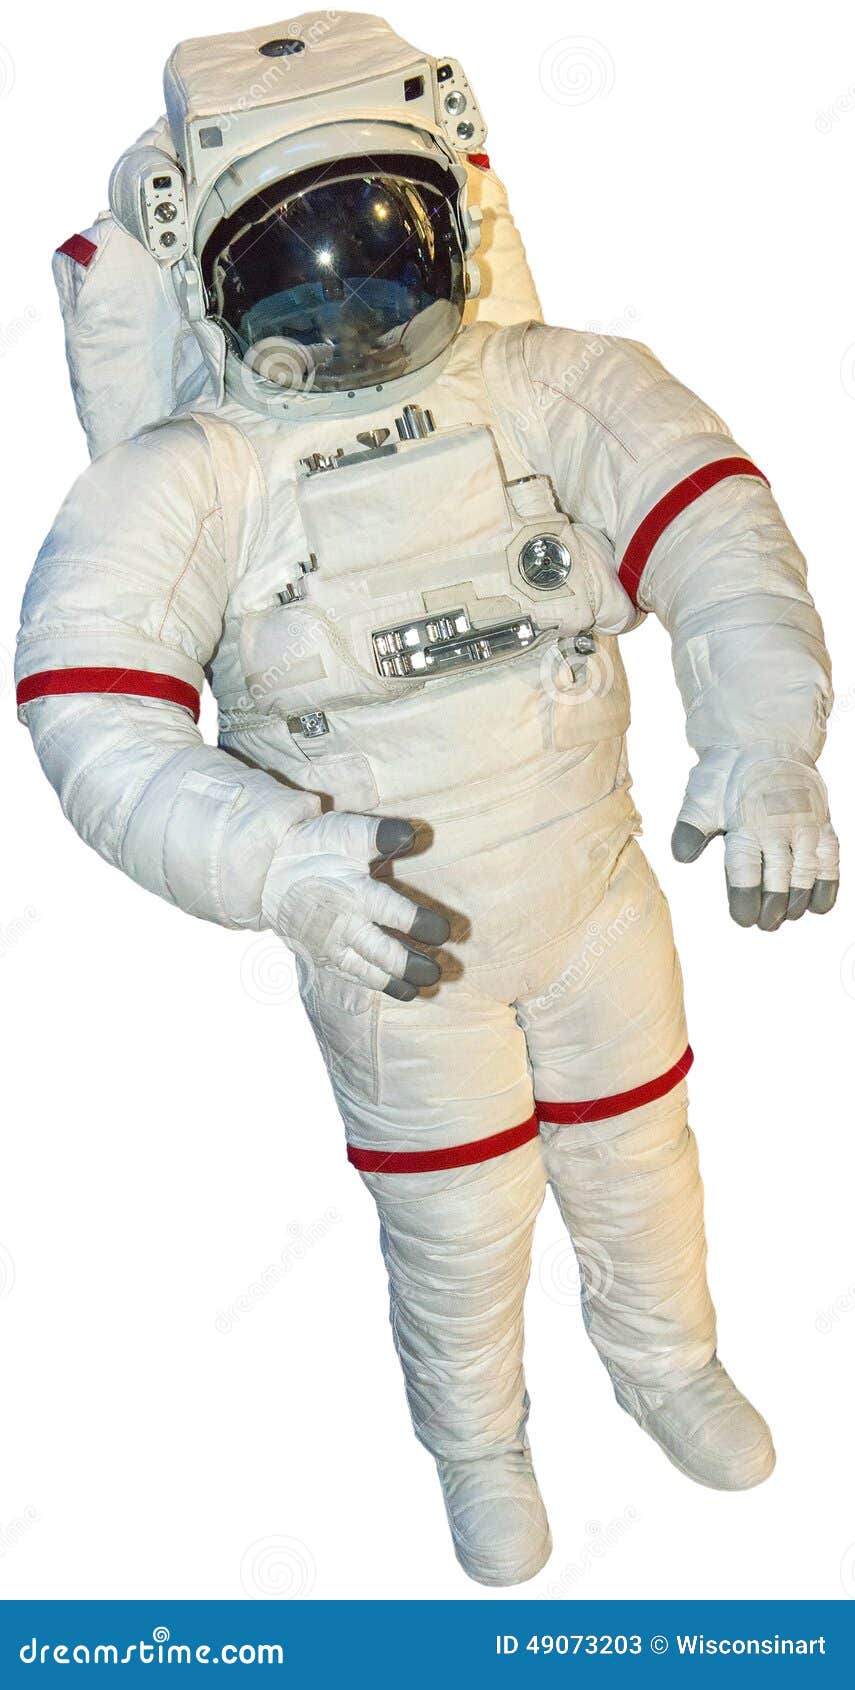 Real Astronaut Spacesuit Isolated Stock Photo - Image: 49073203